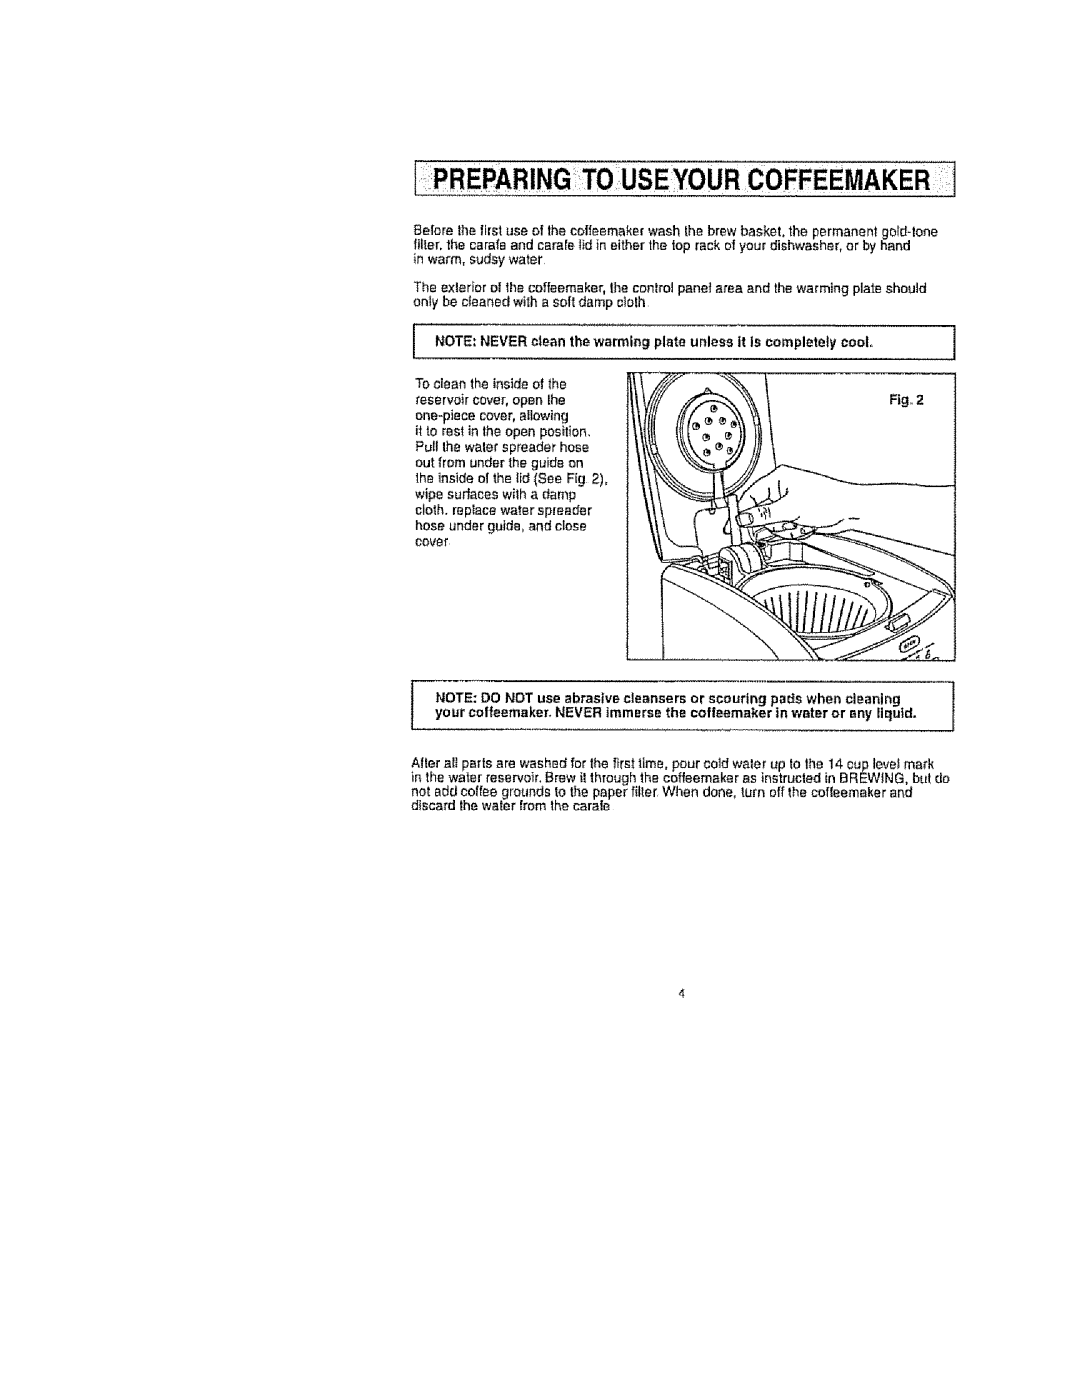 Kenmore 100.90006 operating instructions it to rest in the open position, cloth, replace water spreader 